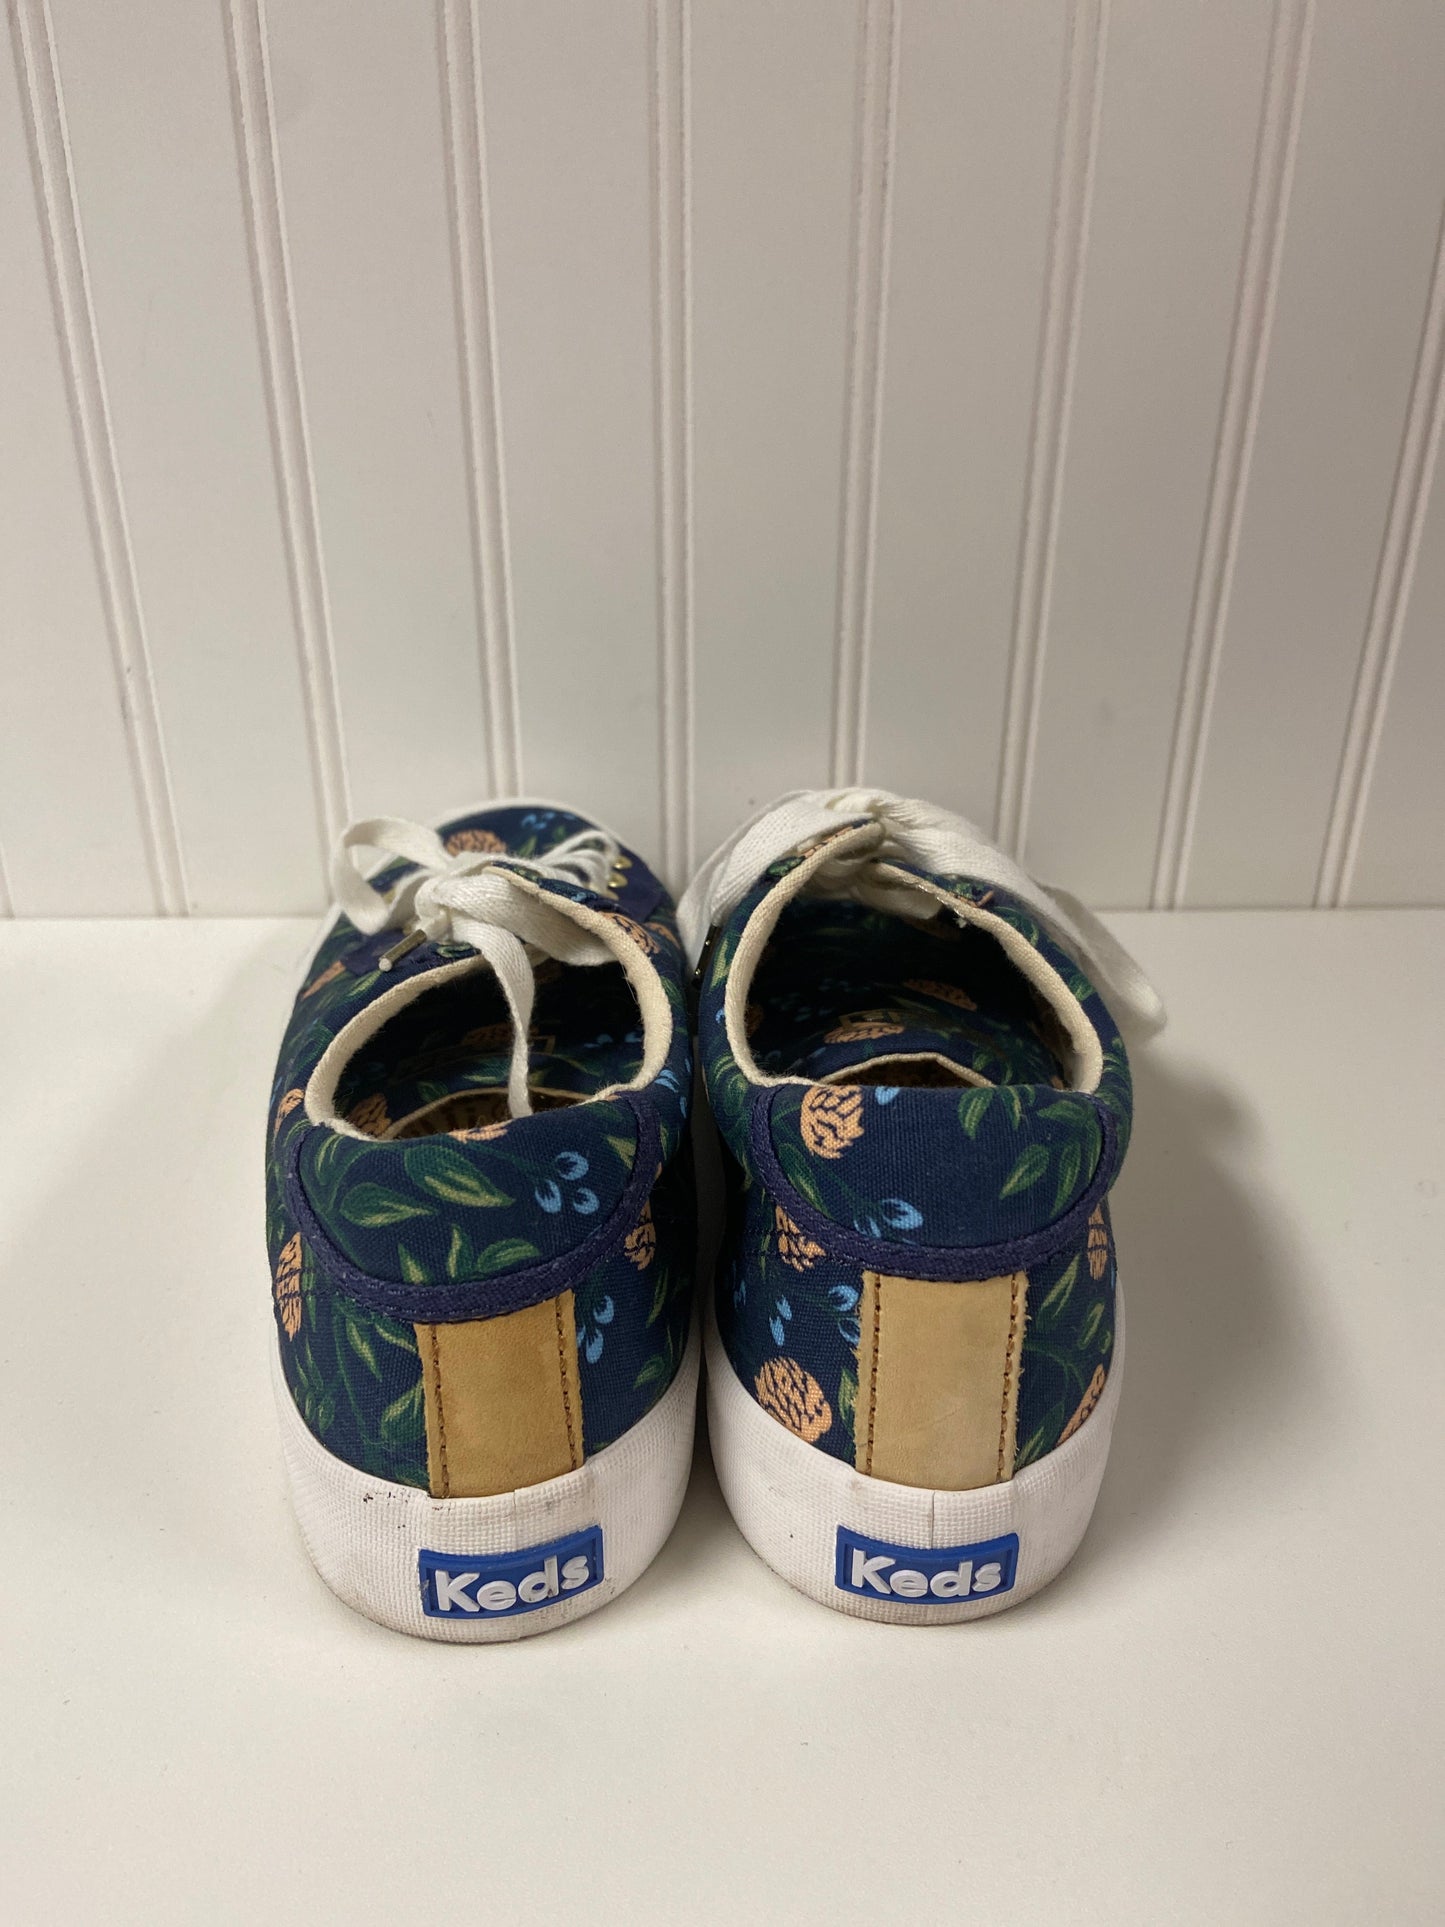 Navy Shoes Sneakers Keds, Size 8.5